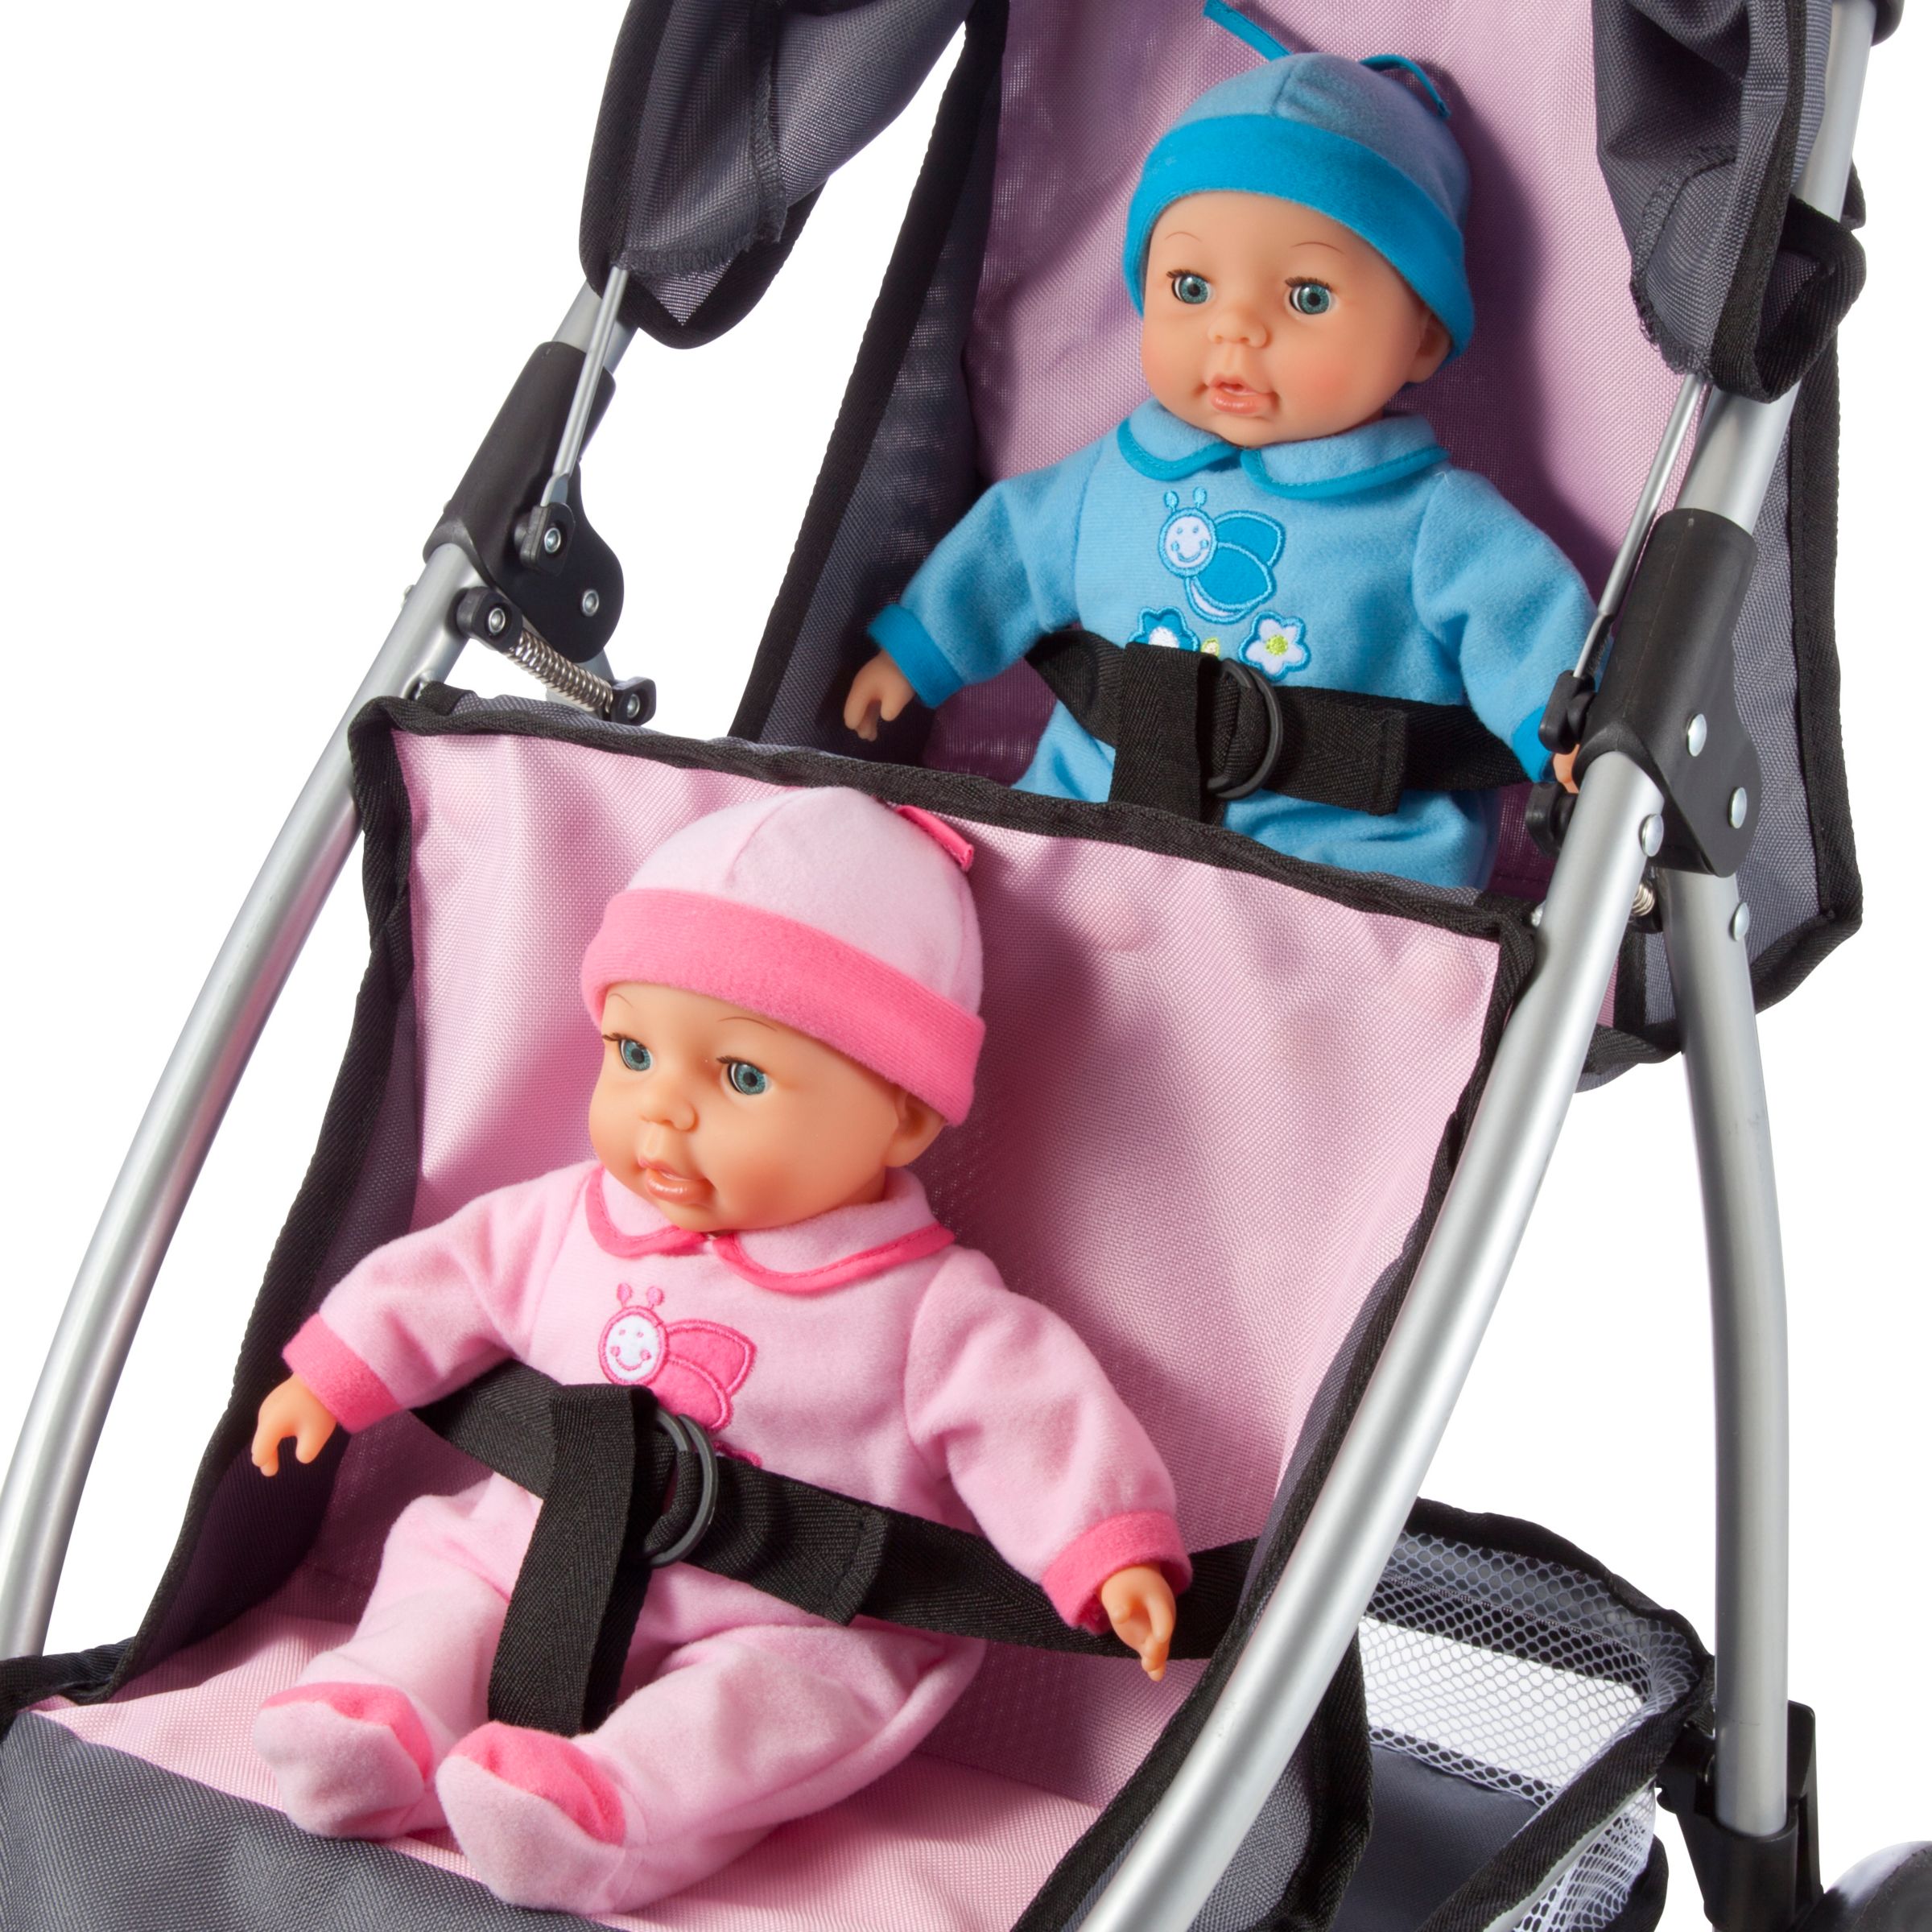 pink and blue double pushchair